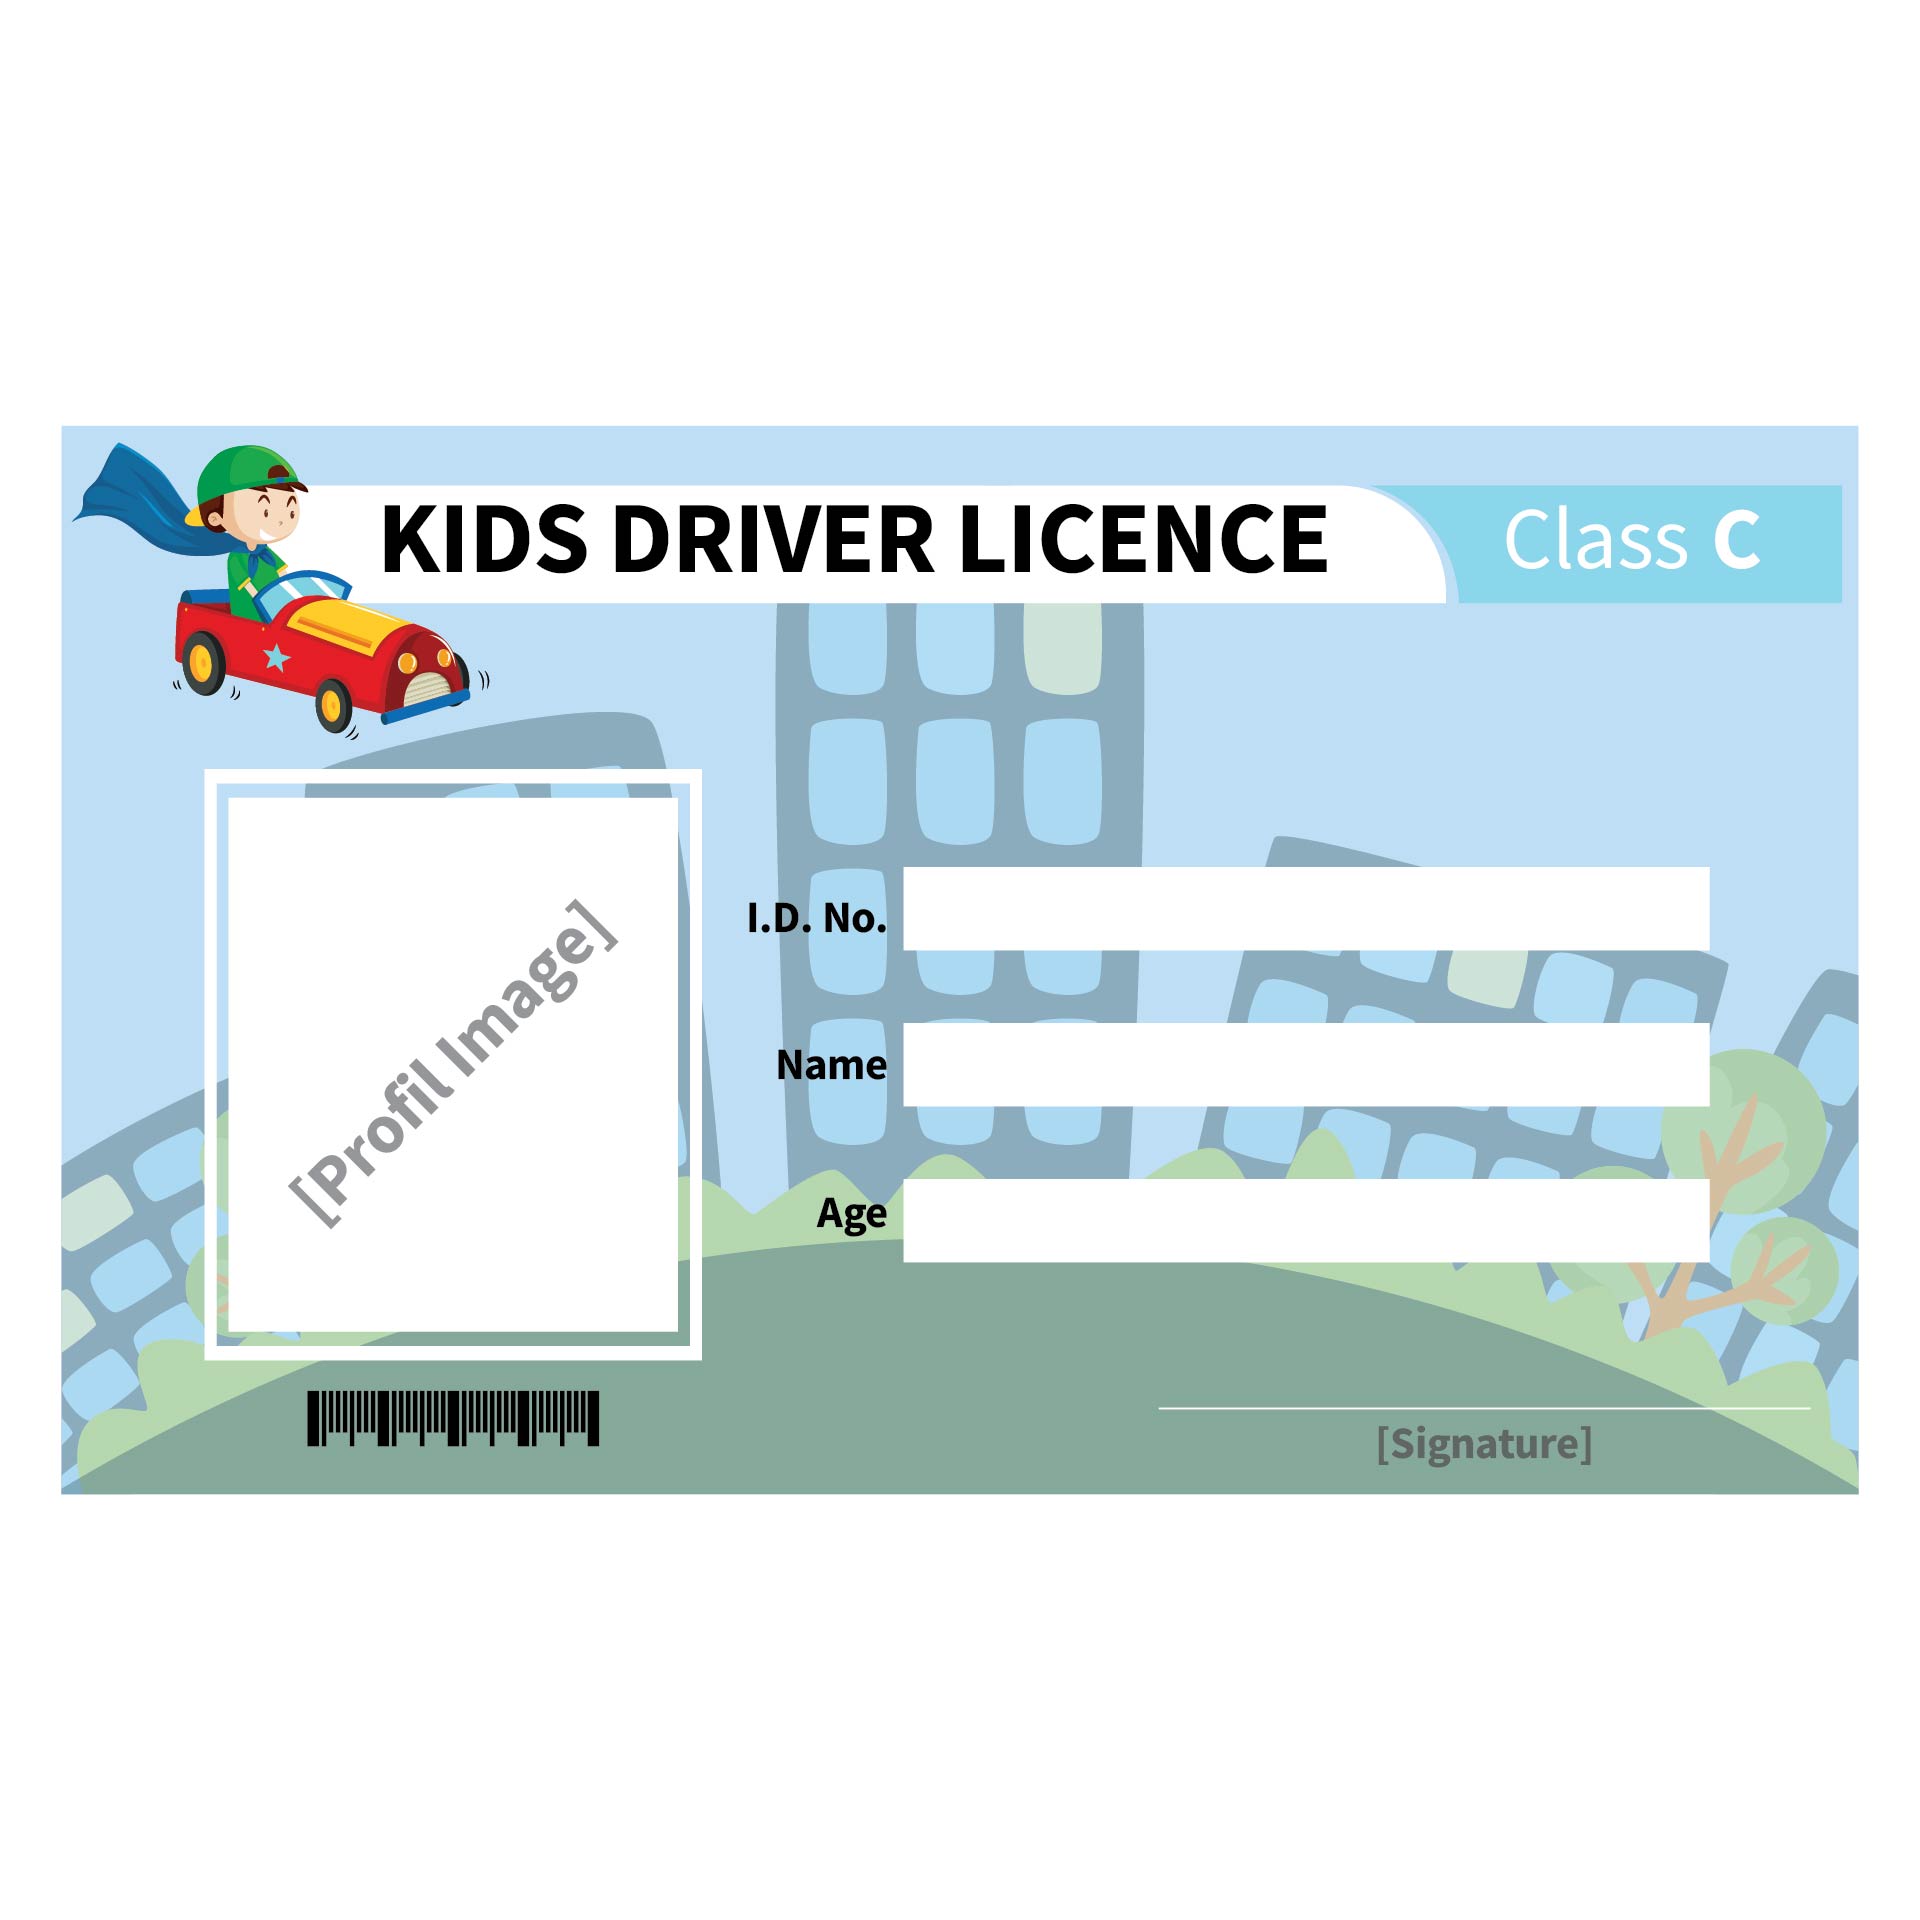 Printable Play Drivers License Template